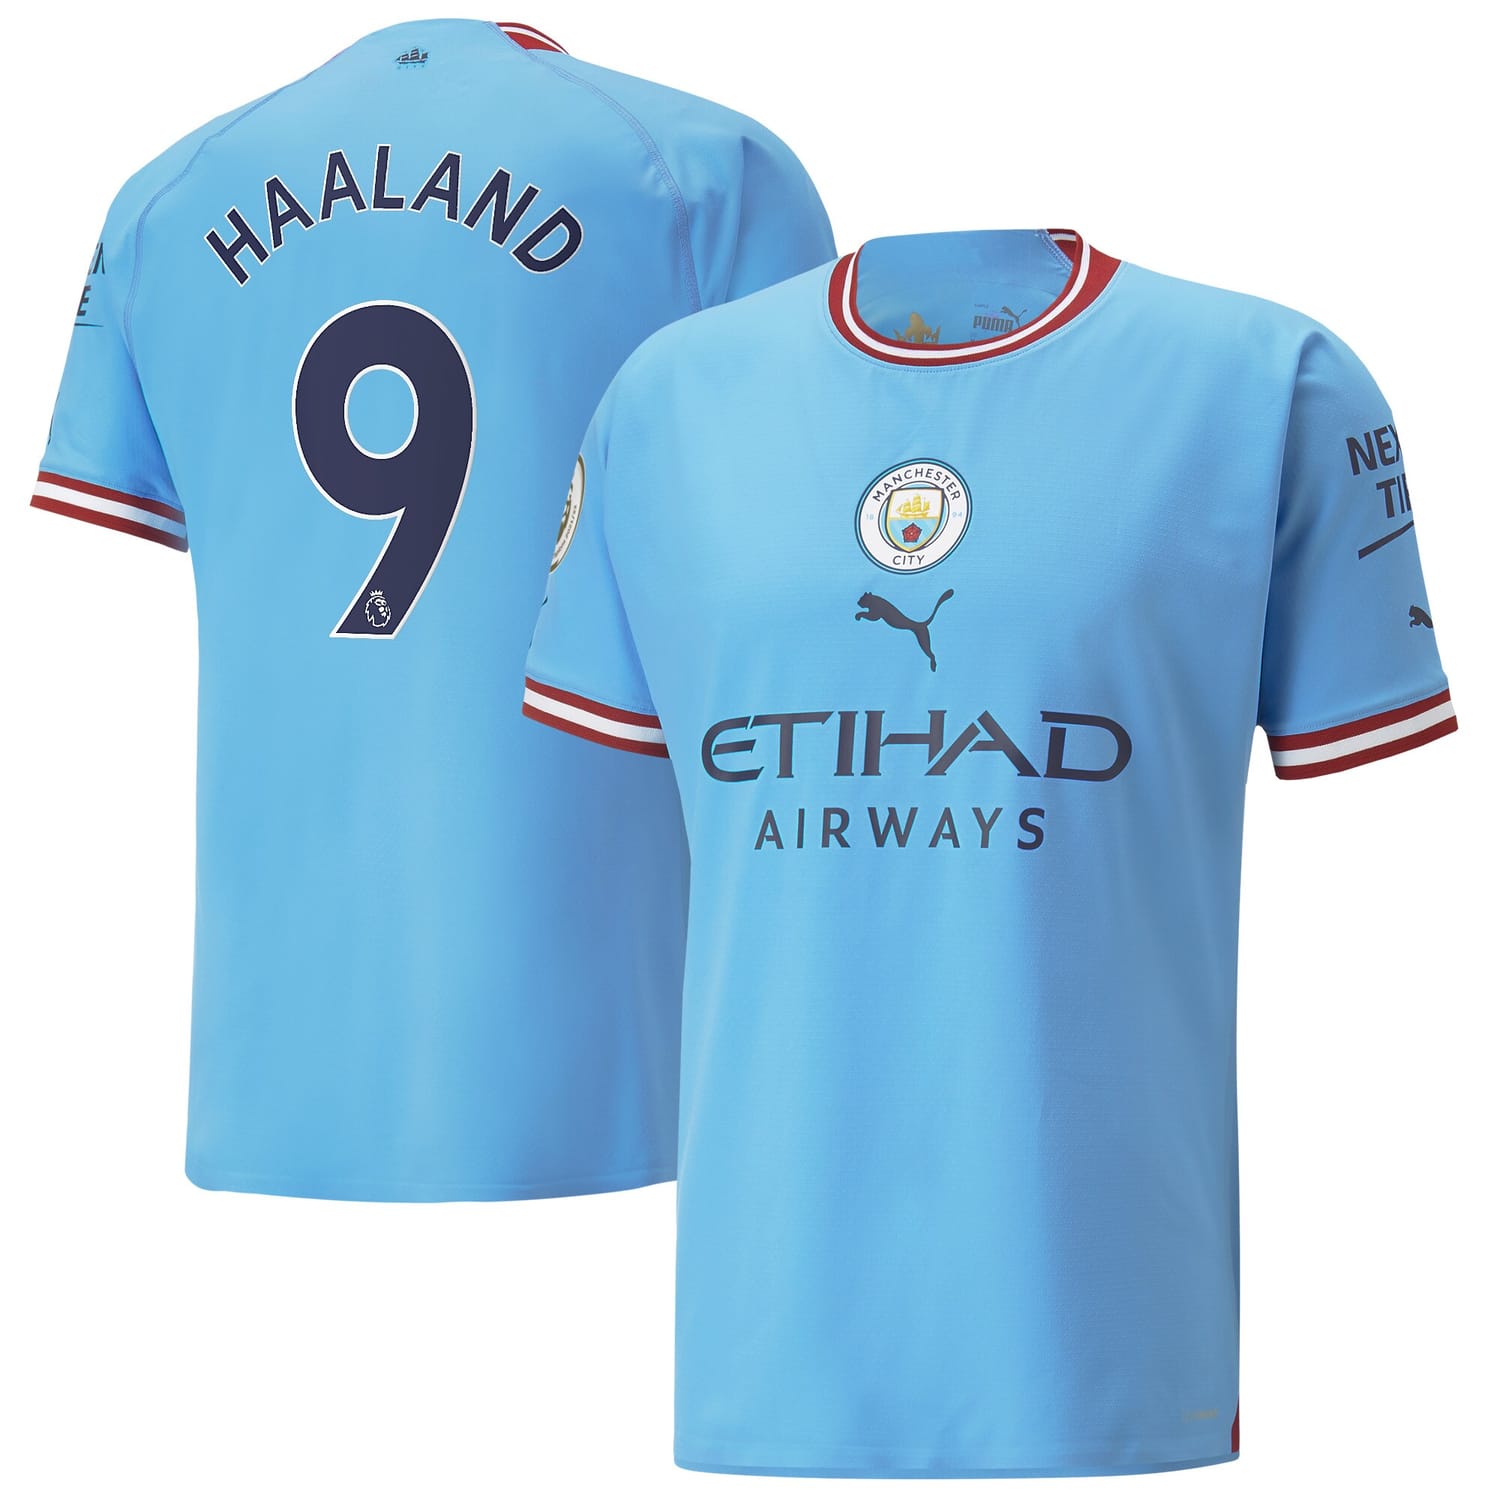 Premier League Manchester City Home Authentic Jersey Shirt Light Blue 2022-23 player Erling Haaland printing for Men